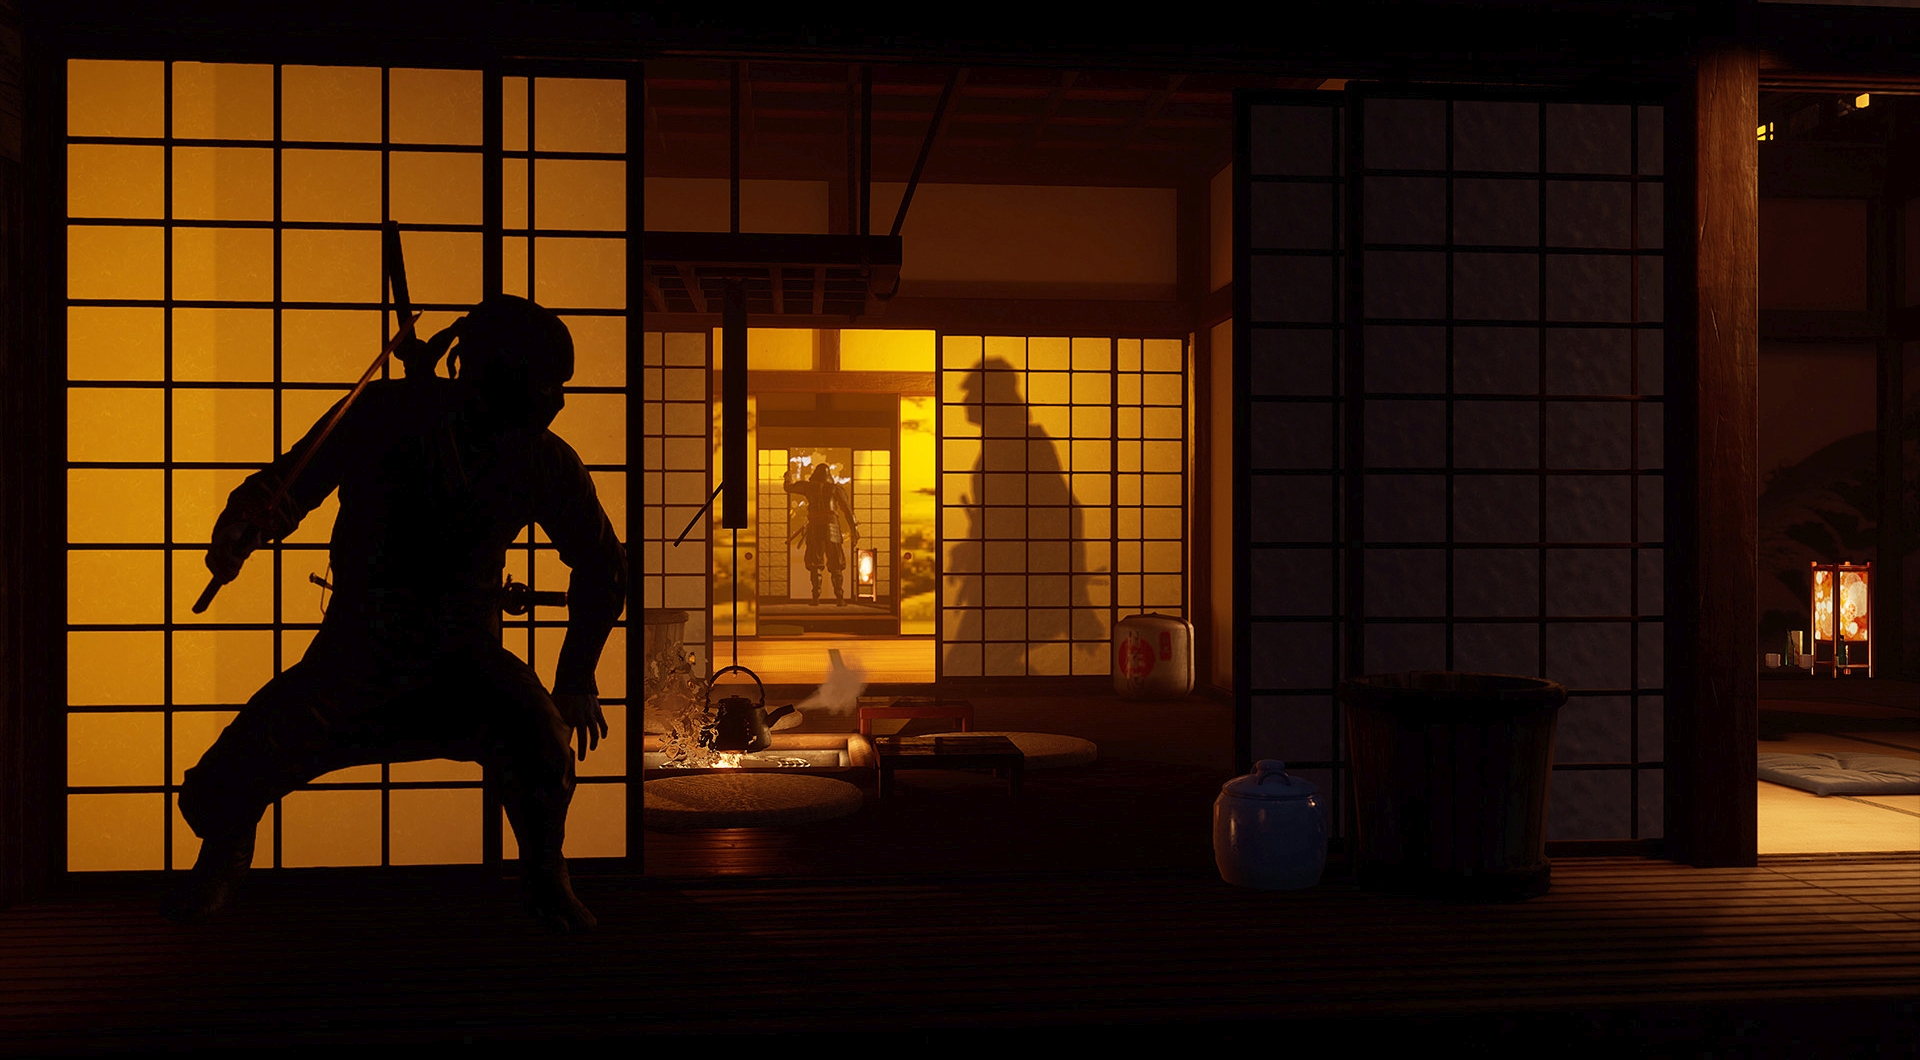 PlayWay And RockGame Team Up For Upcoming Action-Adventure Stealth Game Ninja Simulator